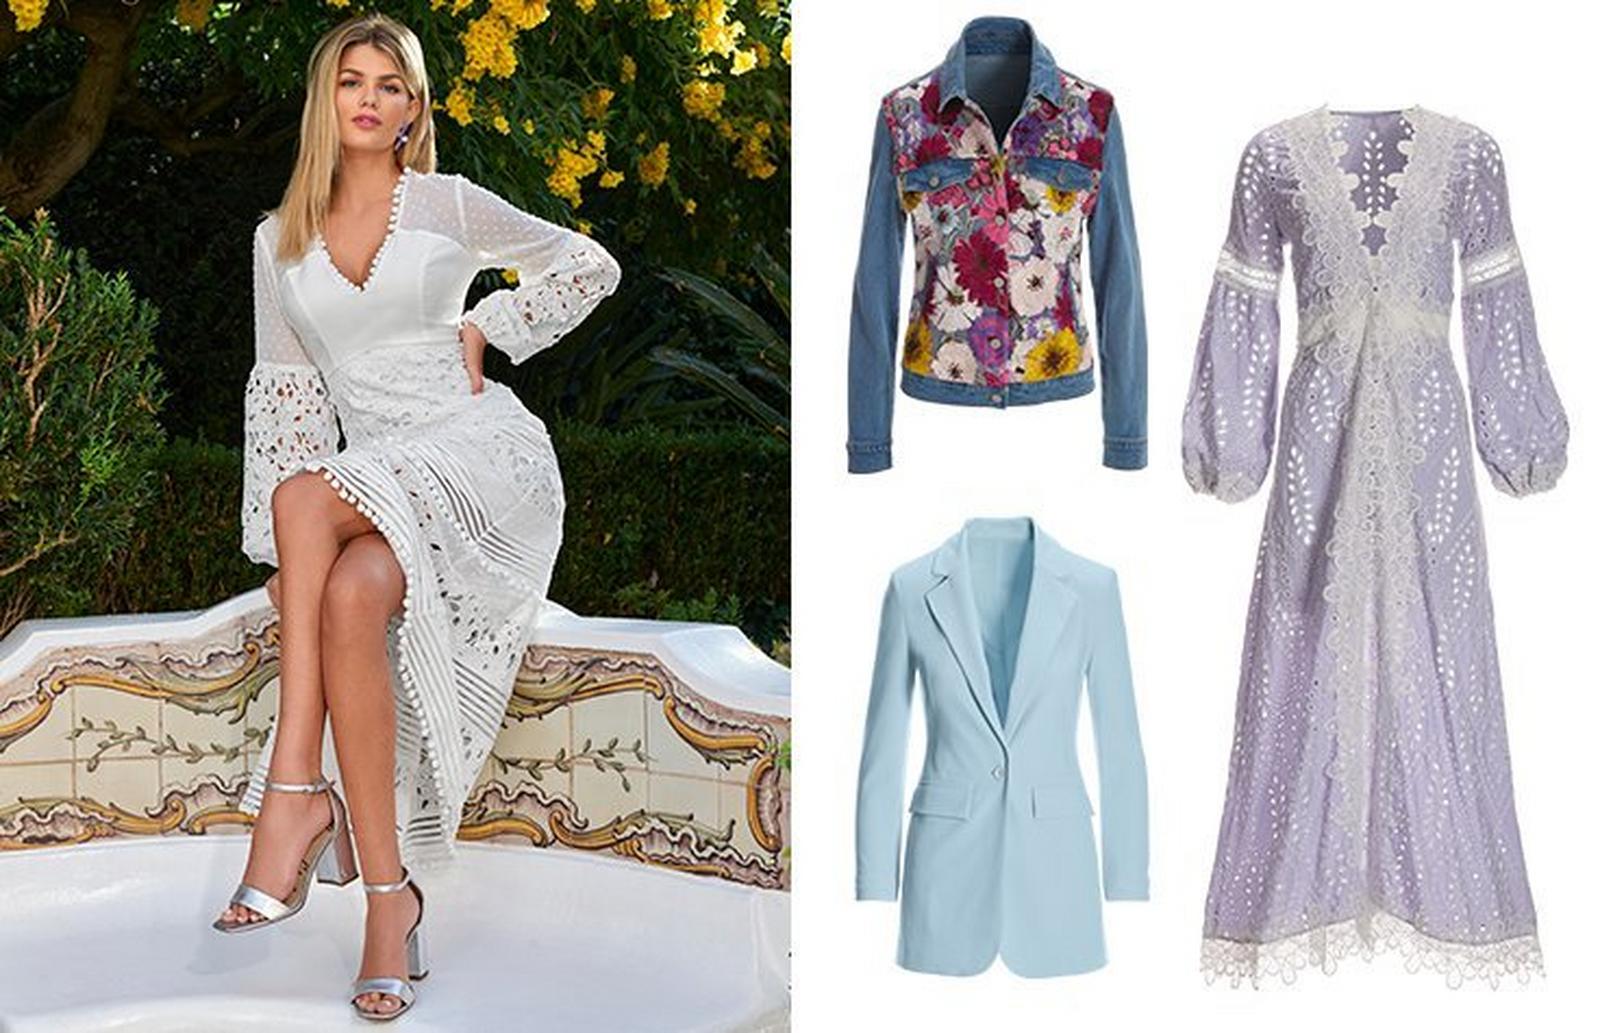 left model wearing a white lace and pom-pom embroidered long-sleeve maxi dress. right panel shows a flower embroidered denim jacket, lavender lace and eyelet duster, and light blue blazer.